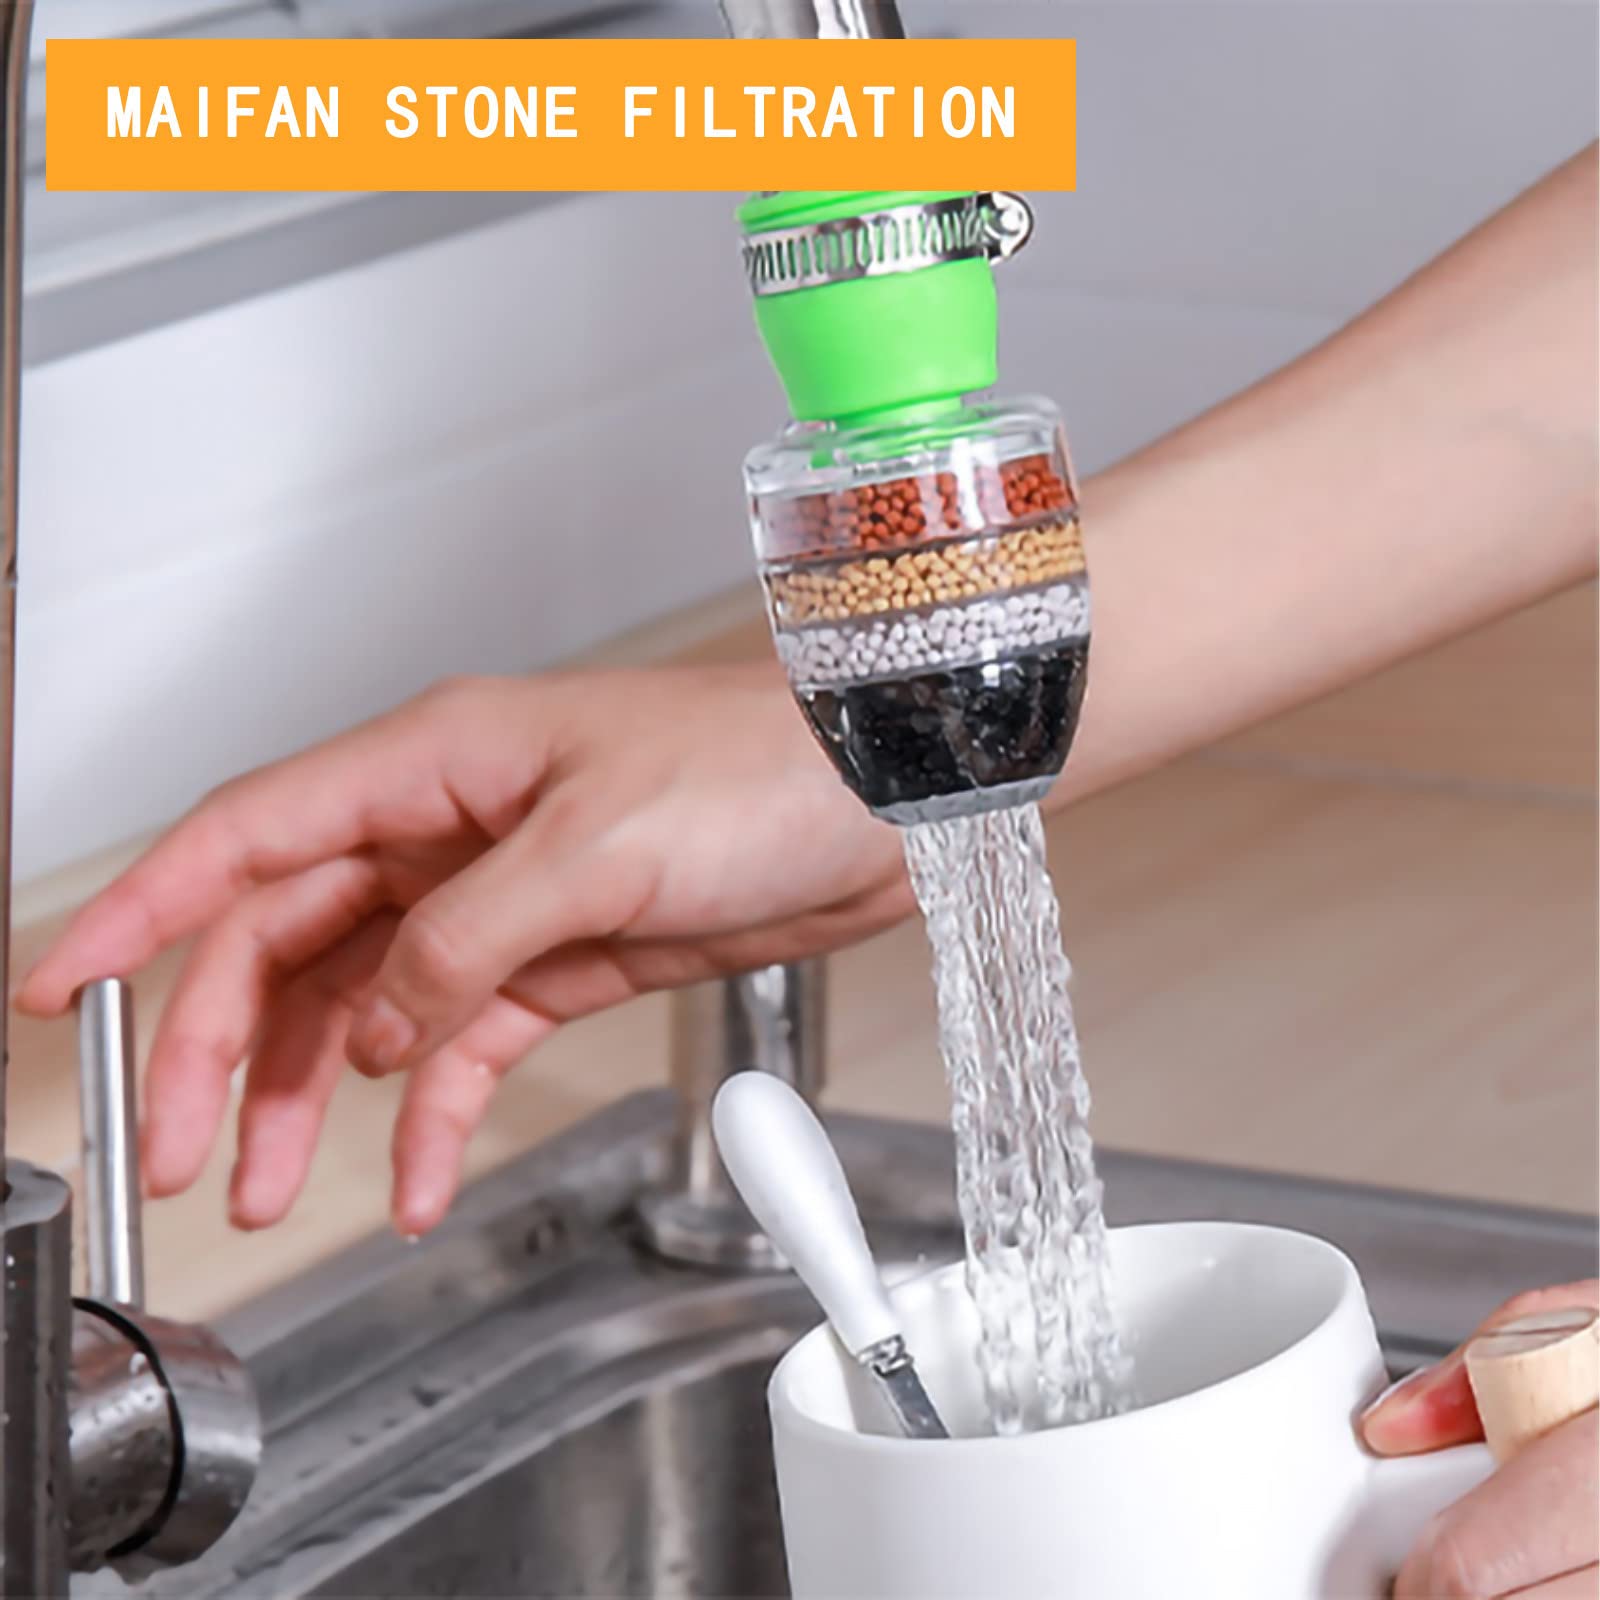 Water Filter for Sink, Water Filter Faucet Bathroom Sink, Interface Faucet Filter Water Purification Universal WaterSaving Water Filter Shower Head Filter Shower Faucet Handle (3pcs)